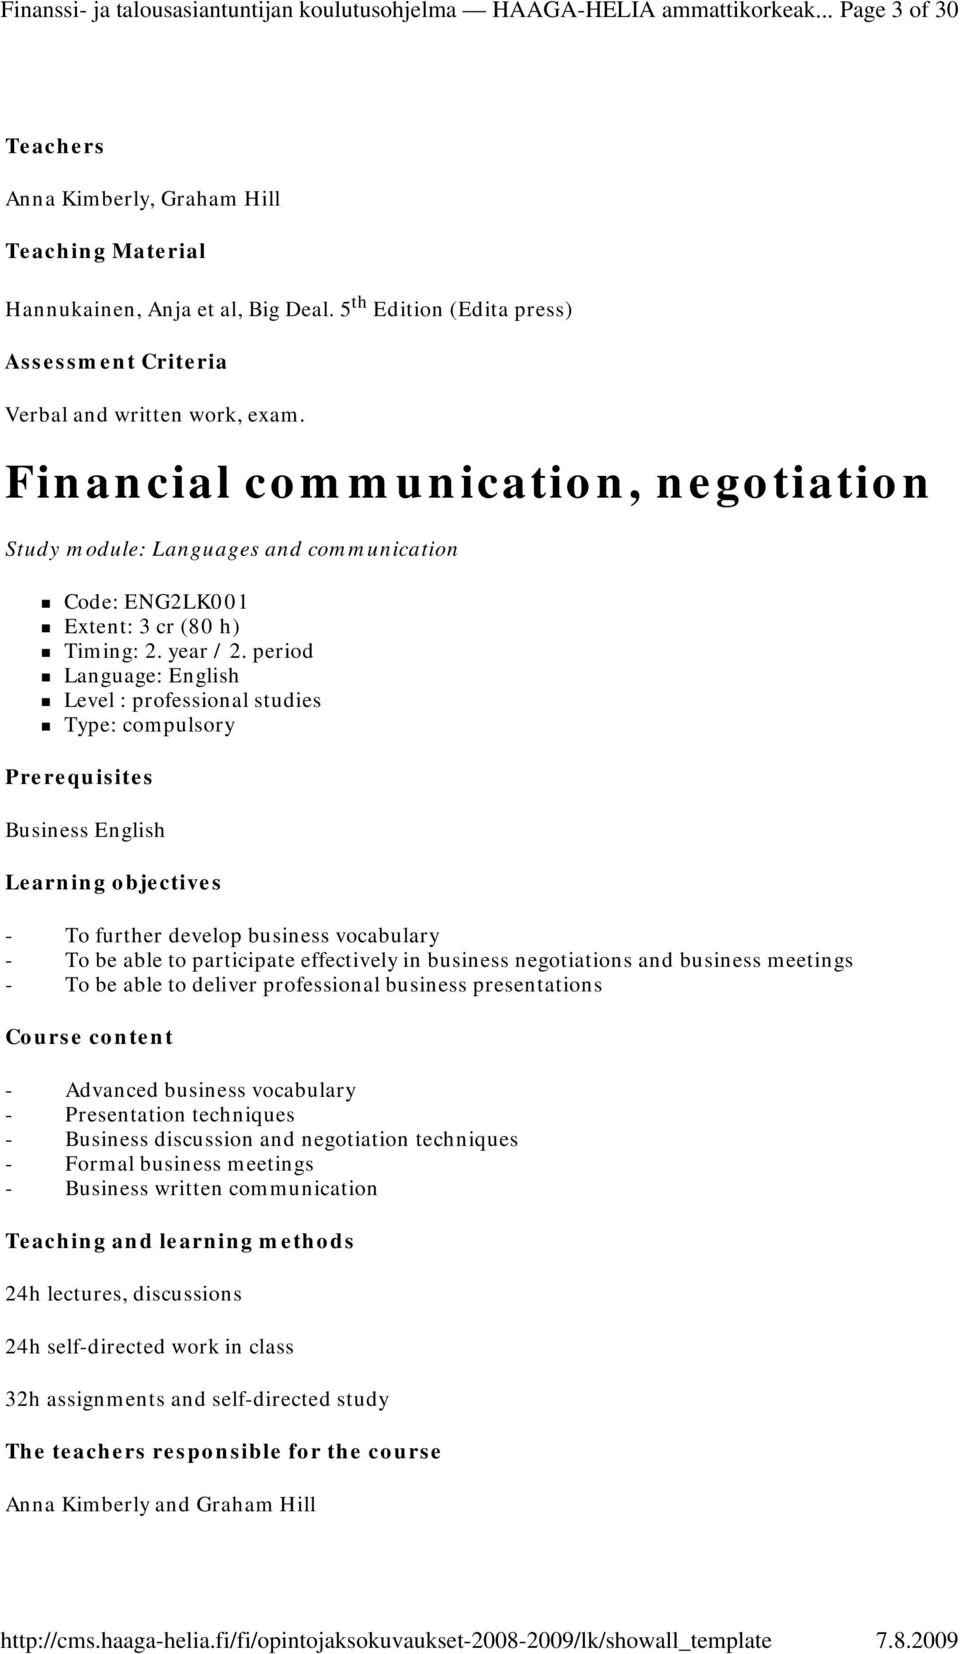 Financial communication, negotiation Study module: Languages and communication Code: ENG2LK001 Extent: 3 cr (80 h) Timing: 2. year / 2.